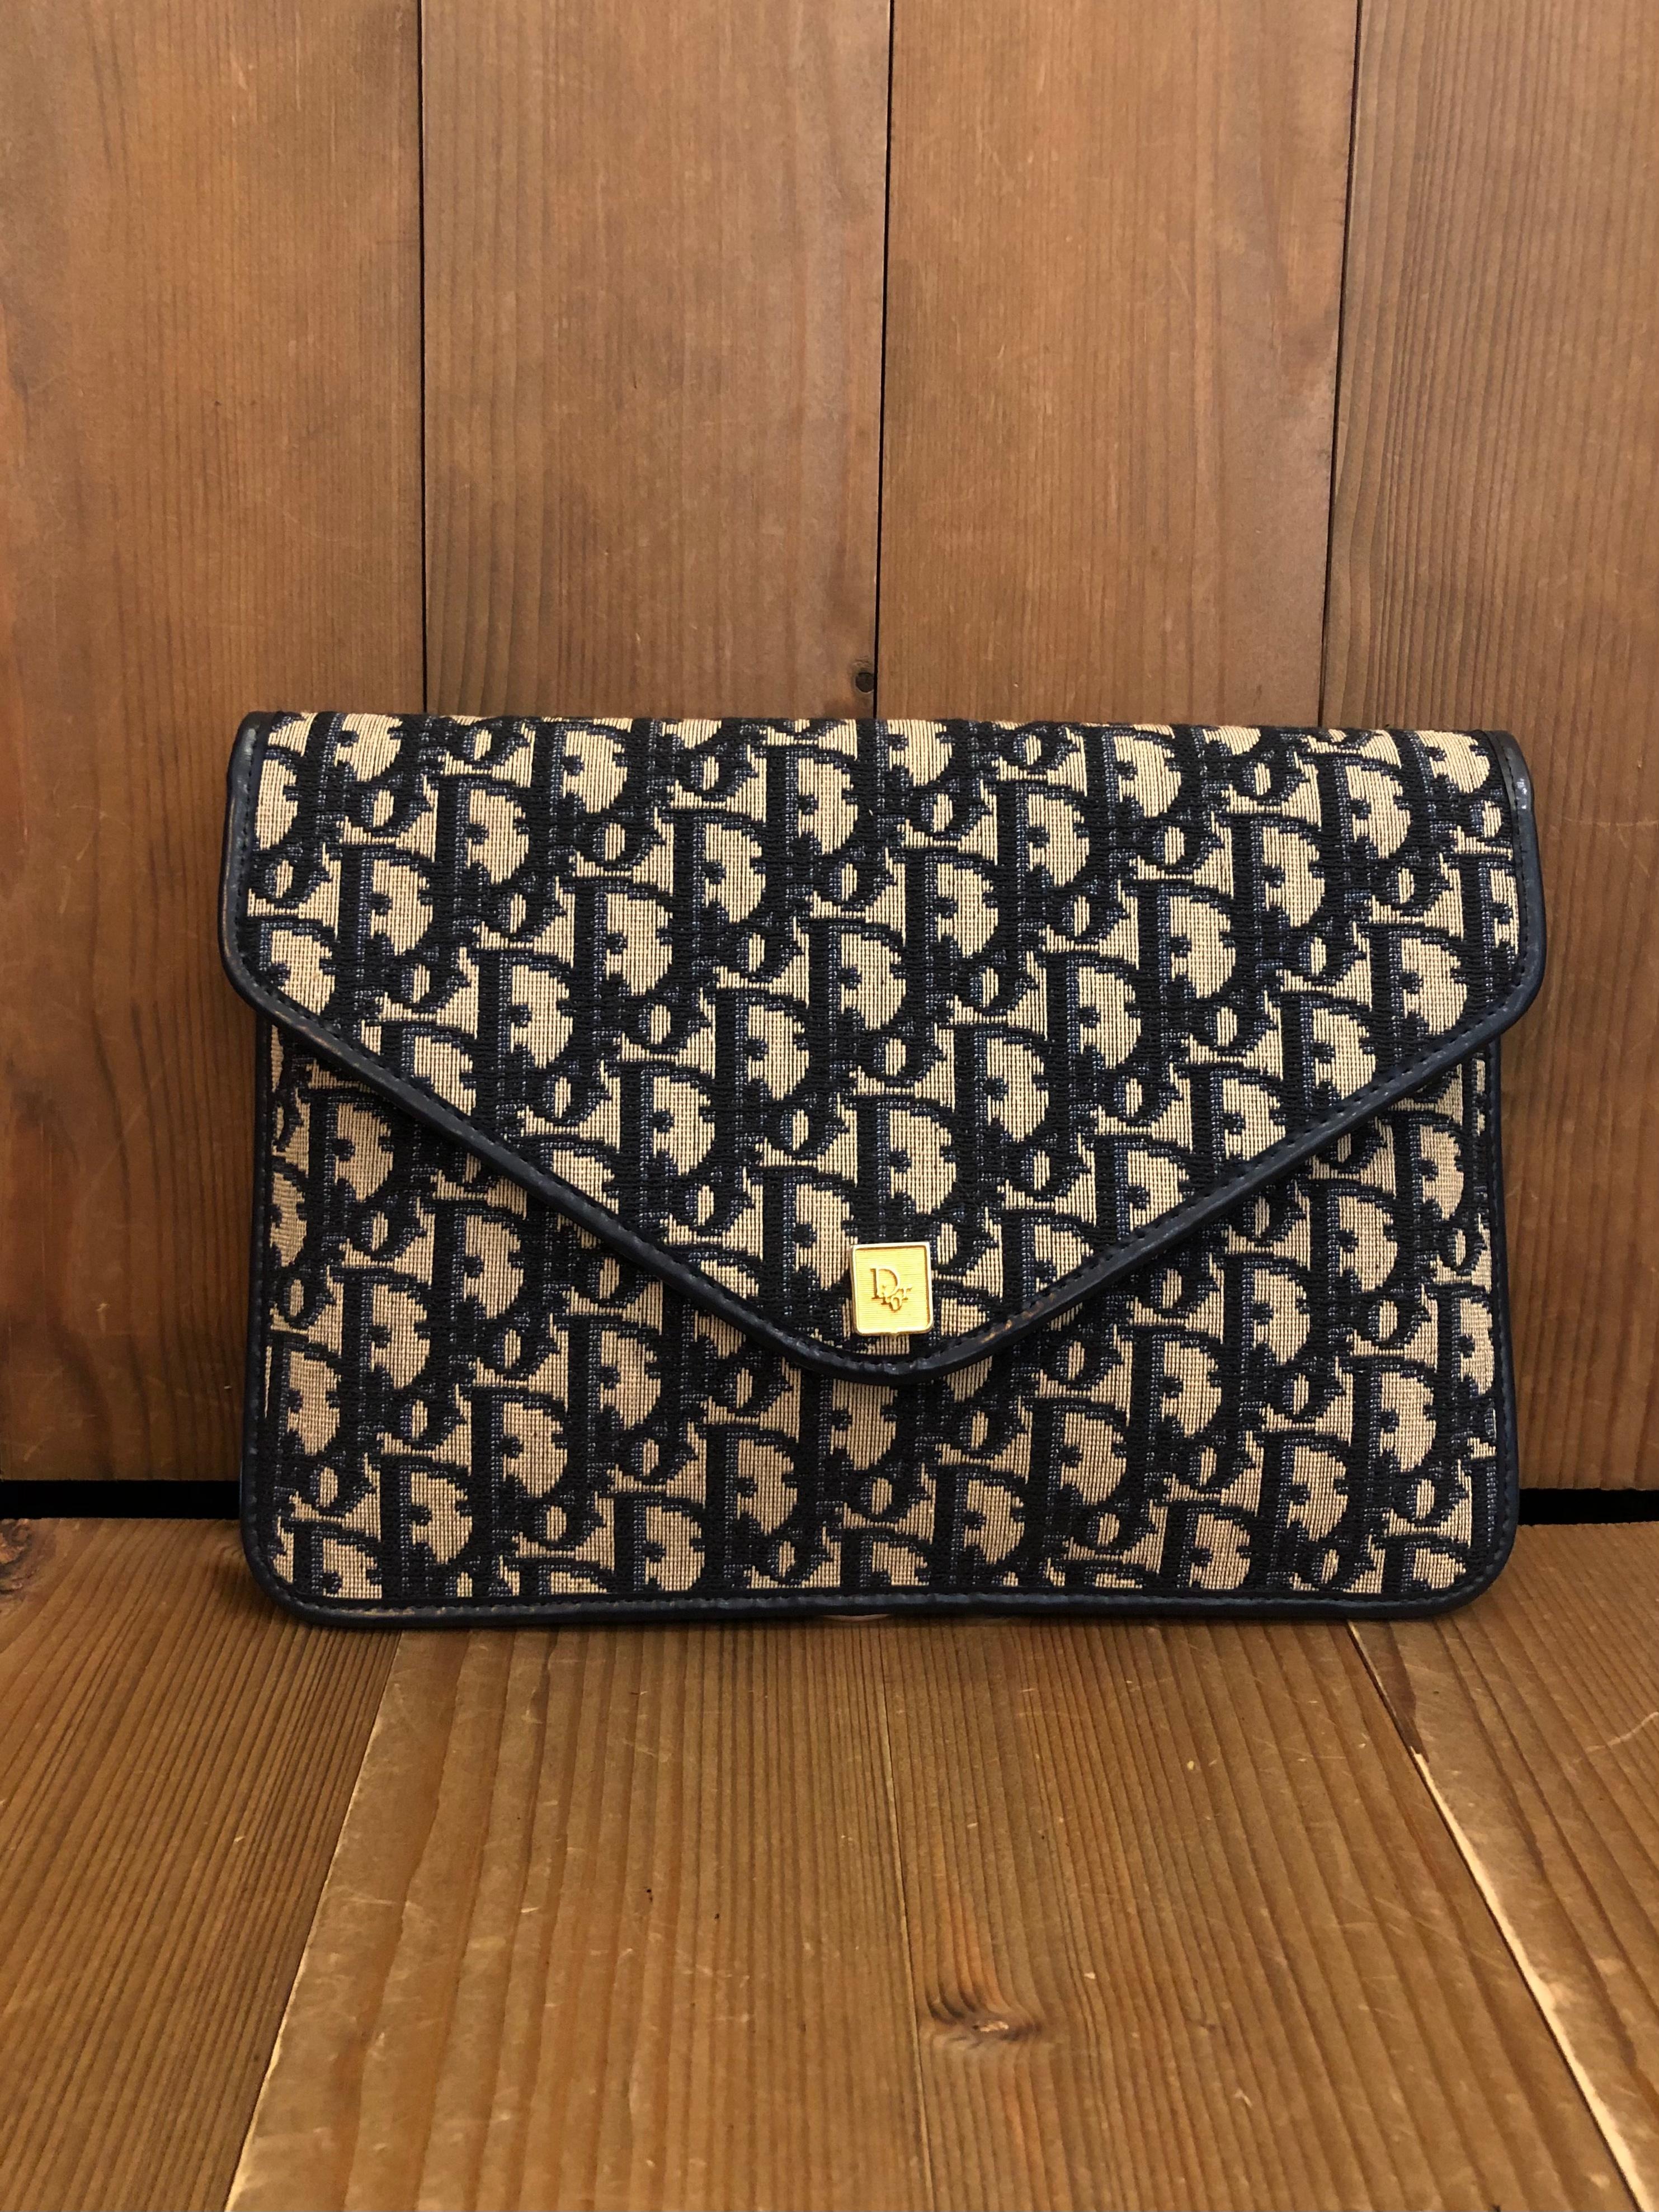 This vintage CHRISTIAN DIOR envelope clutch bag is crafted of Dior signature trotter jacquard in navy trimmed with navy leather. Front flap snap closure (replaced with magnetic snap) opens to a coated leather interior in navy. Made in France.